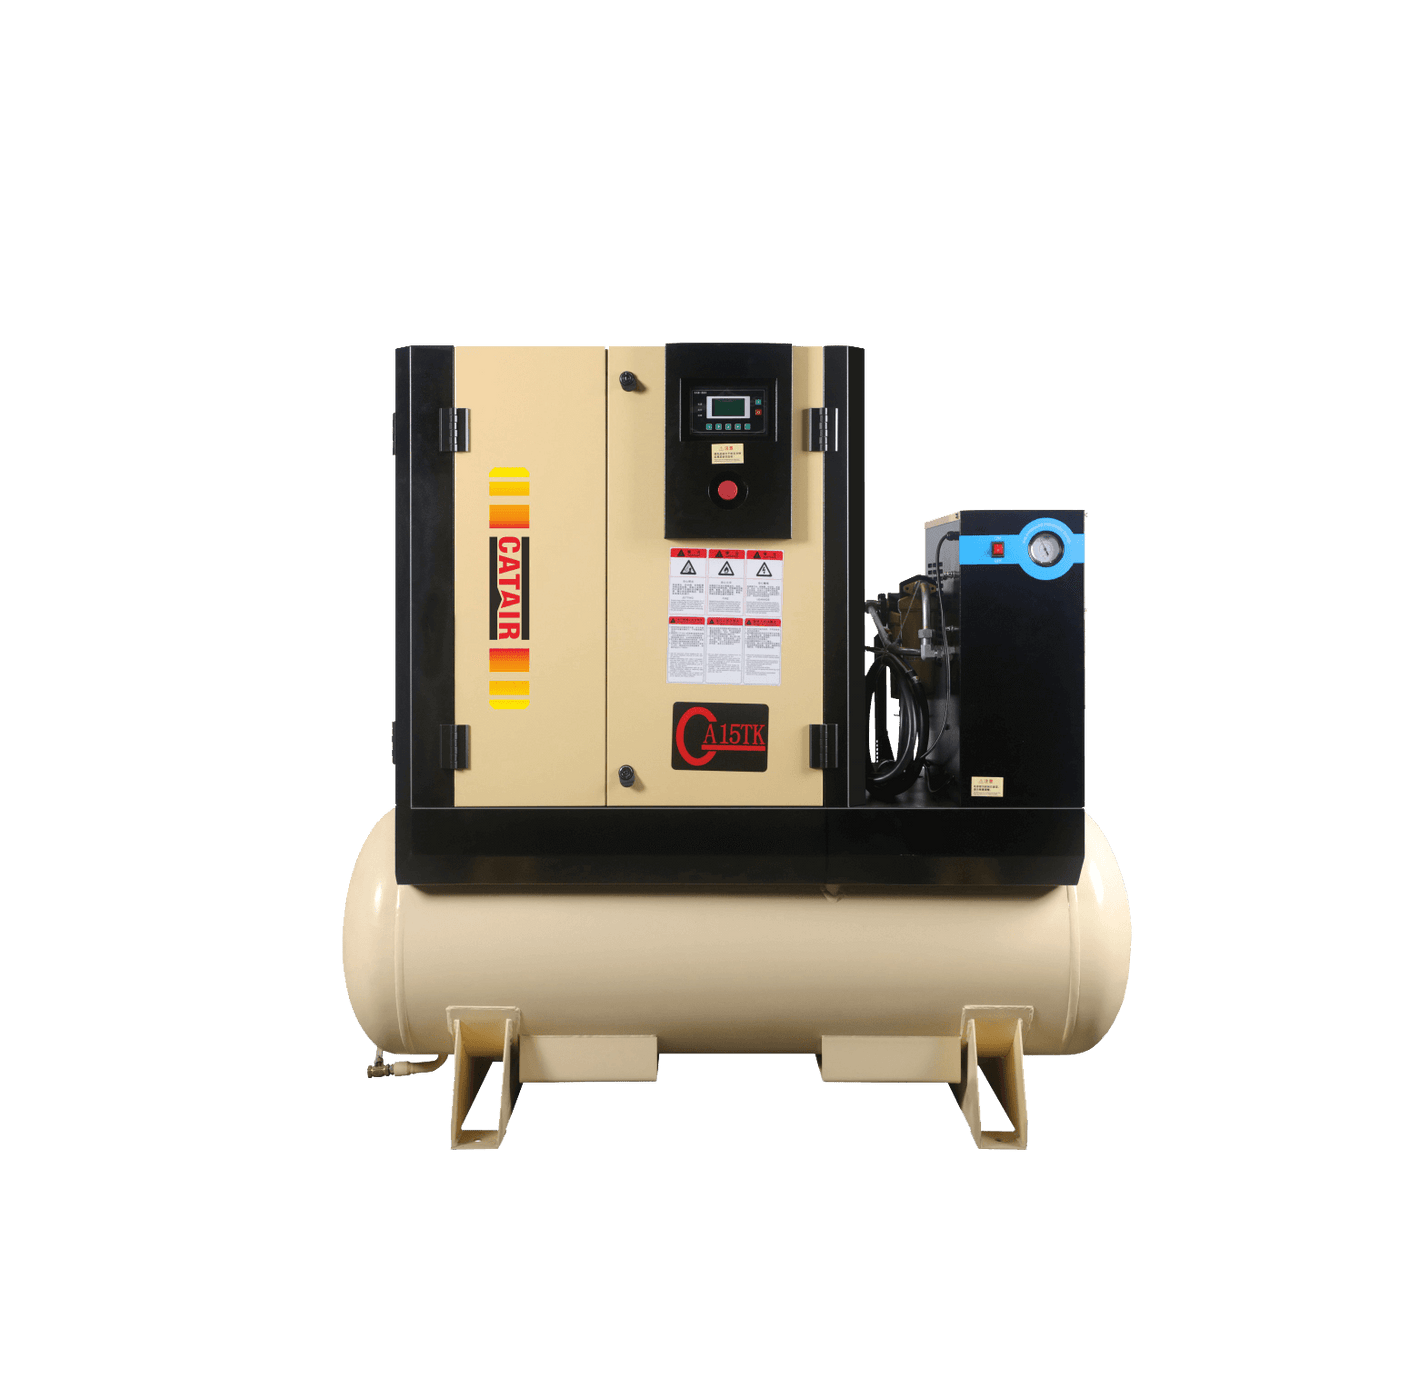 Air Compressor An air compressor for laser is a device that provides compressed air as an auxiliary gas for laser cutting machines. Compressed air can help to blow away the smoke and debris from the cutting area, improve the cutting quality and speed, and